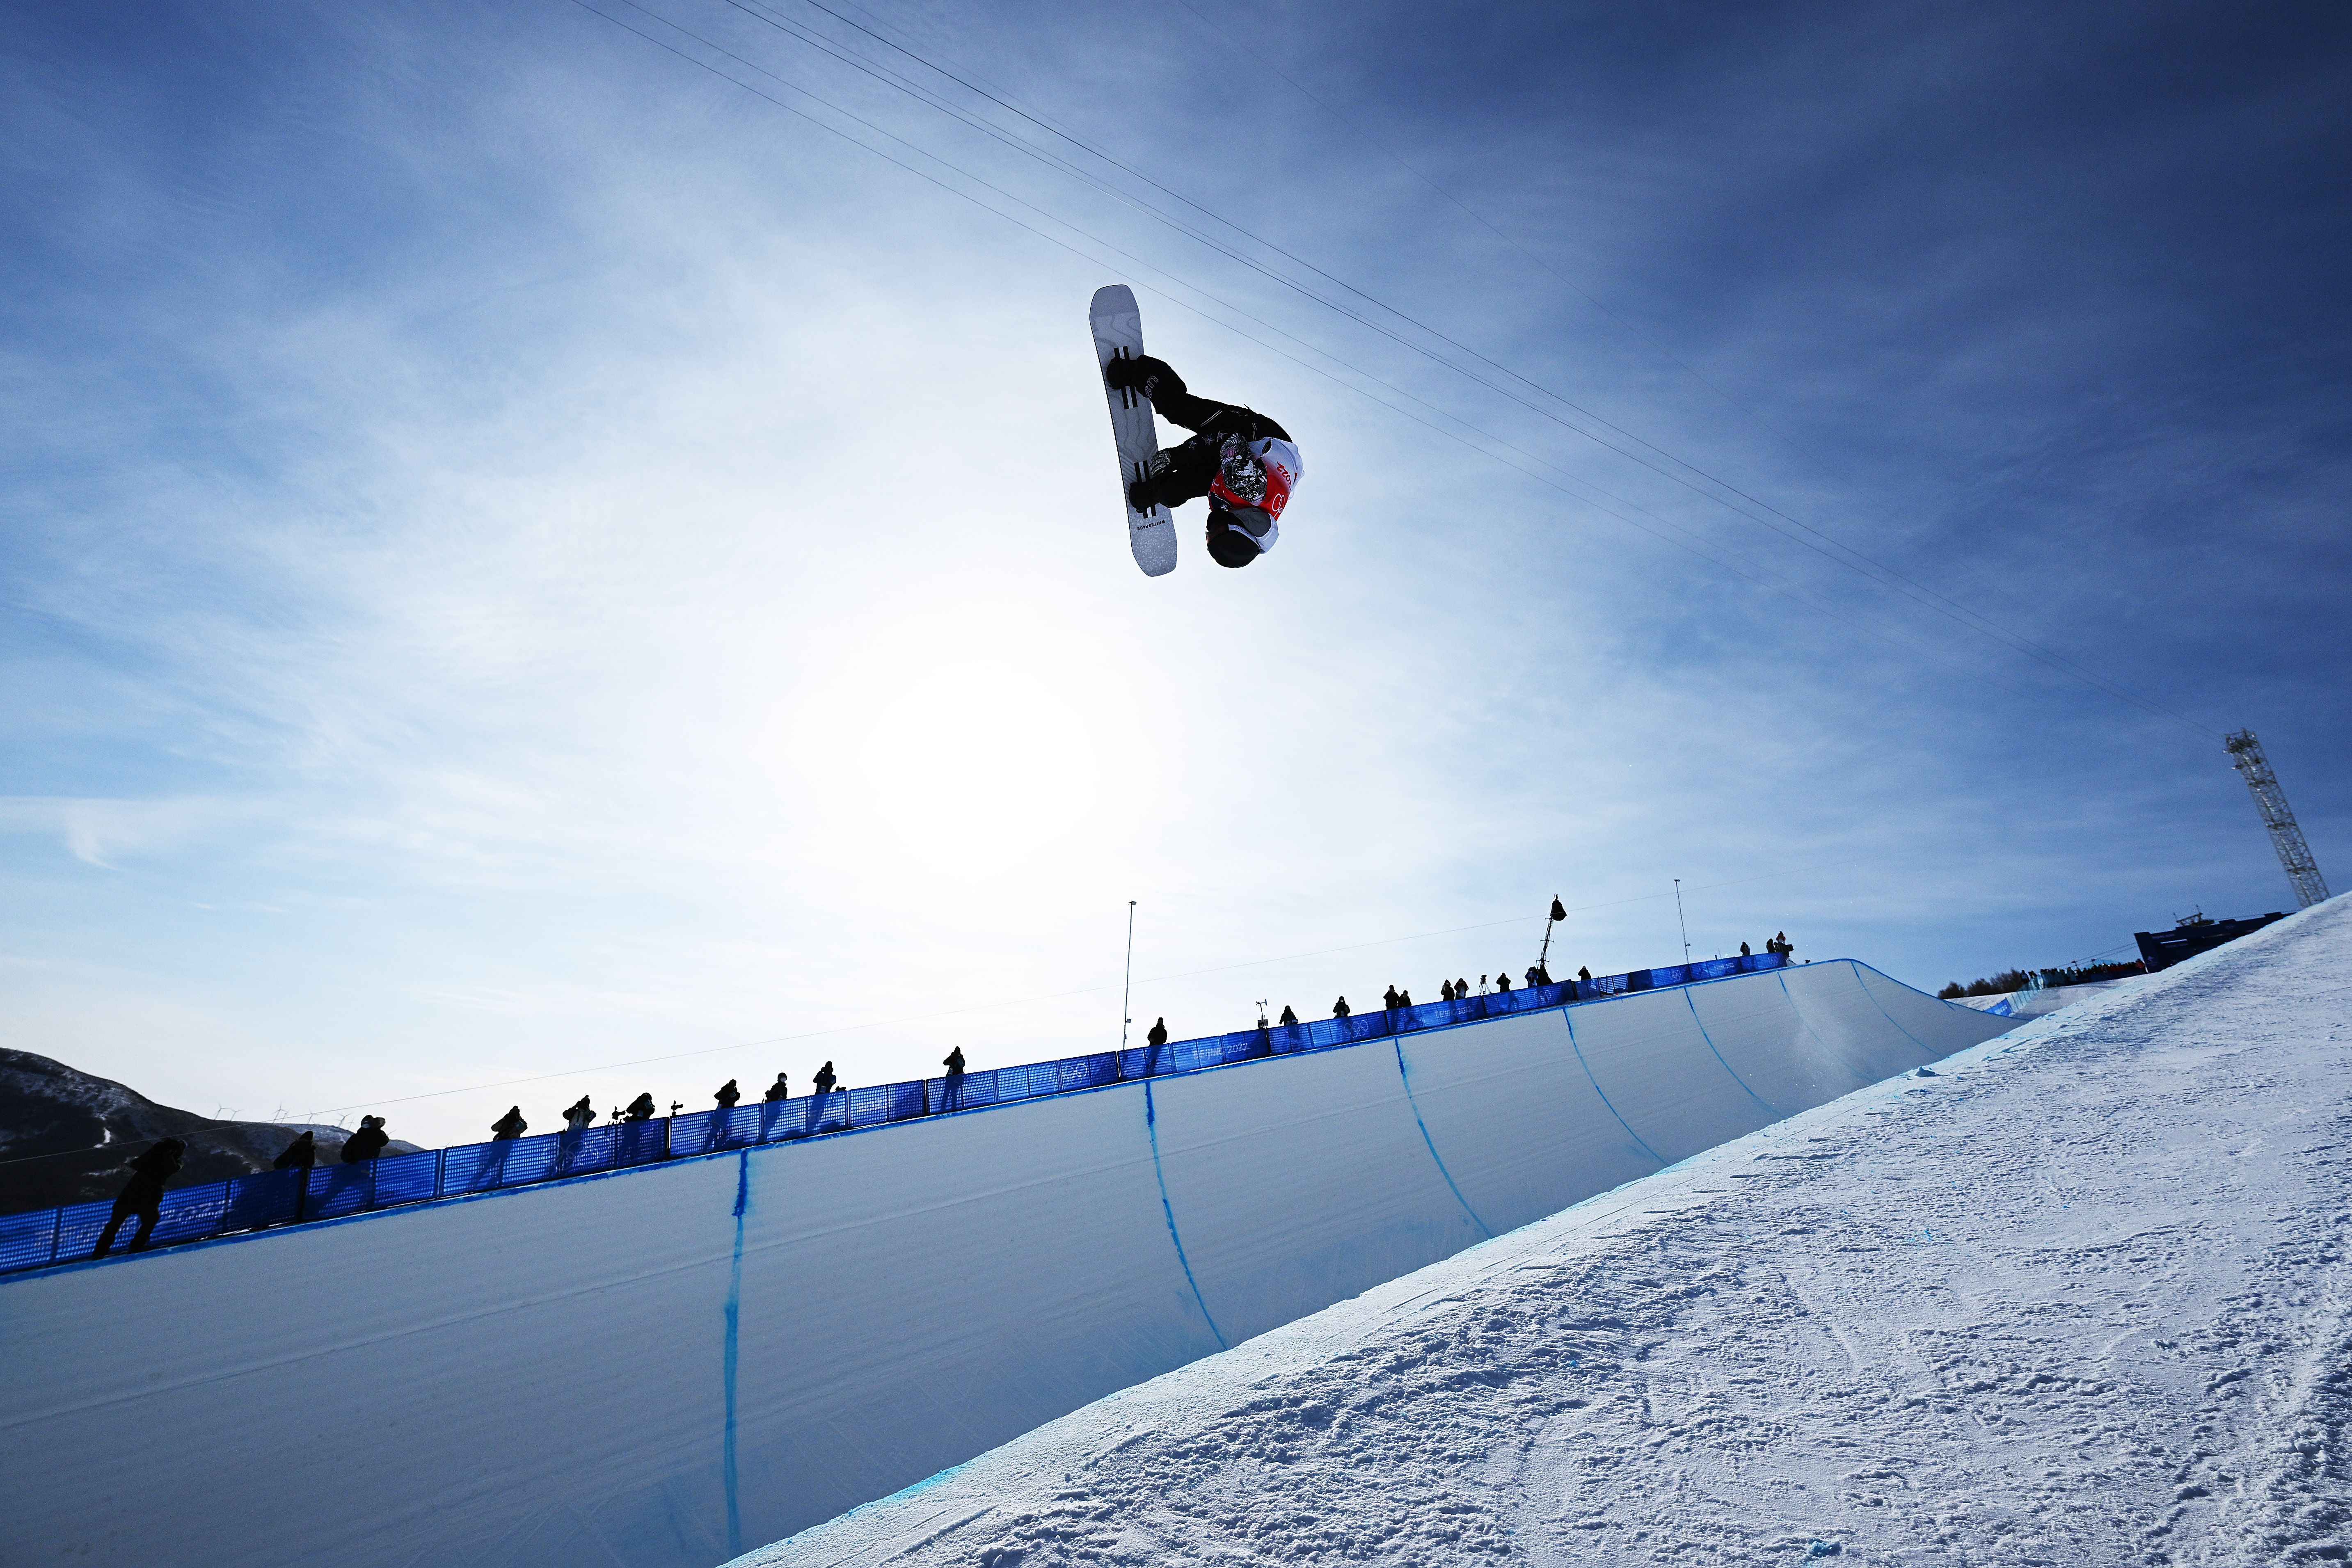  Shaun White of Team United States performs a trick during the Men's Snowboard Halfpipe Final on day 7 of the Winter Olympics on February 11, 2022 in Zhangjiakou, China